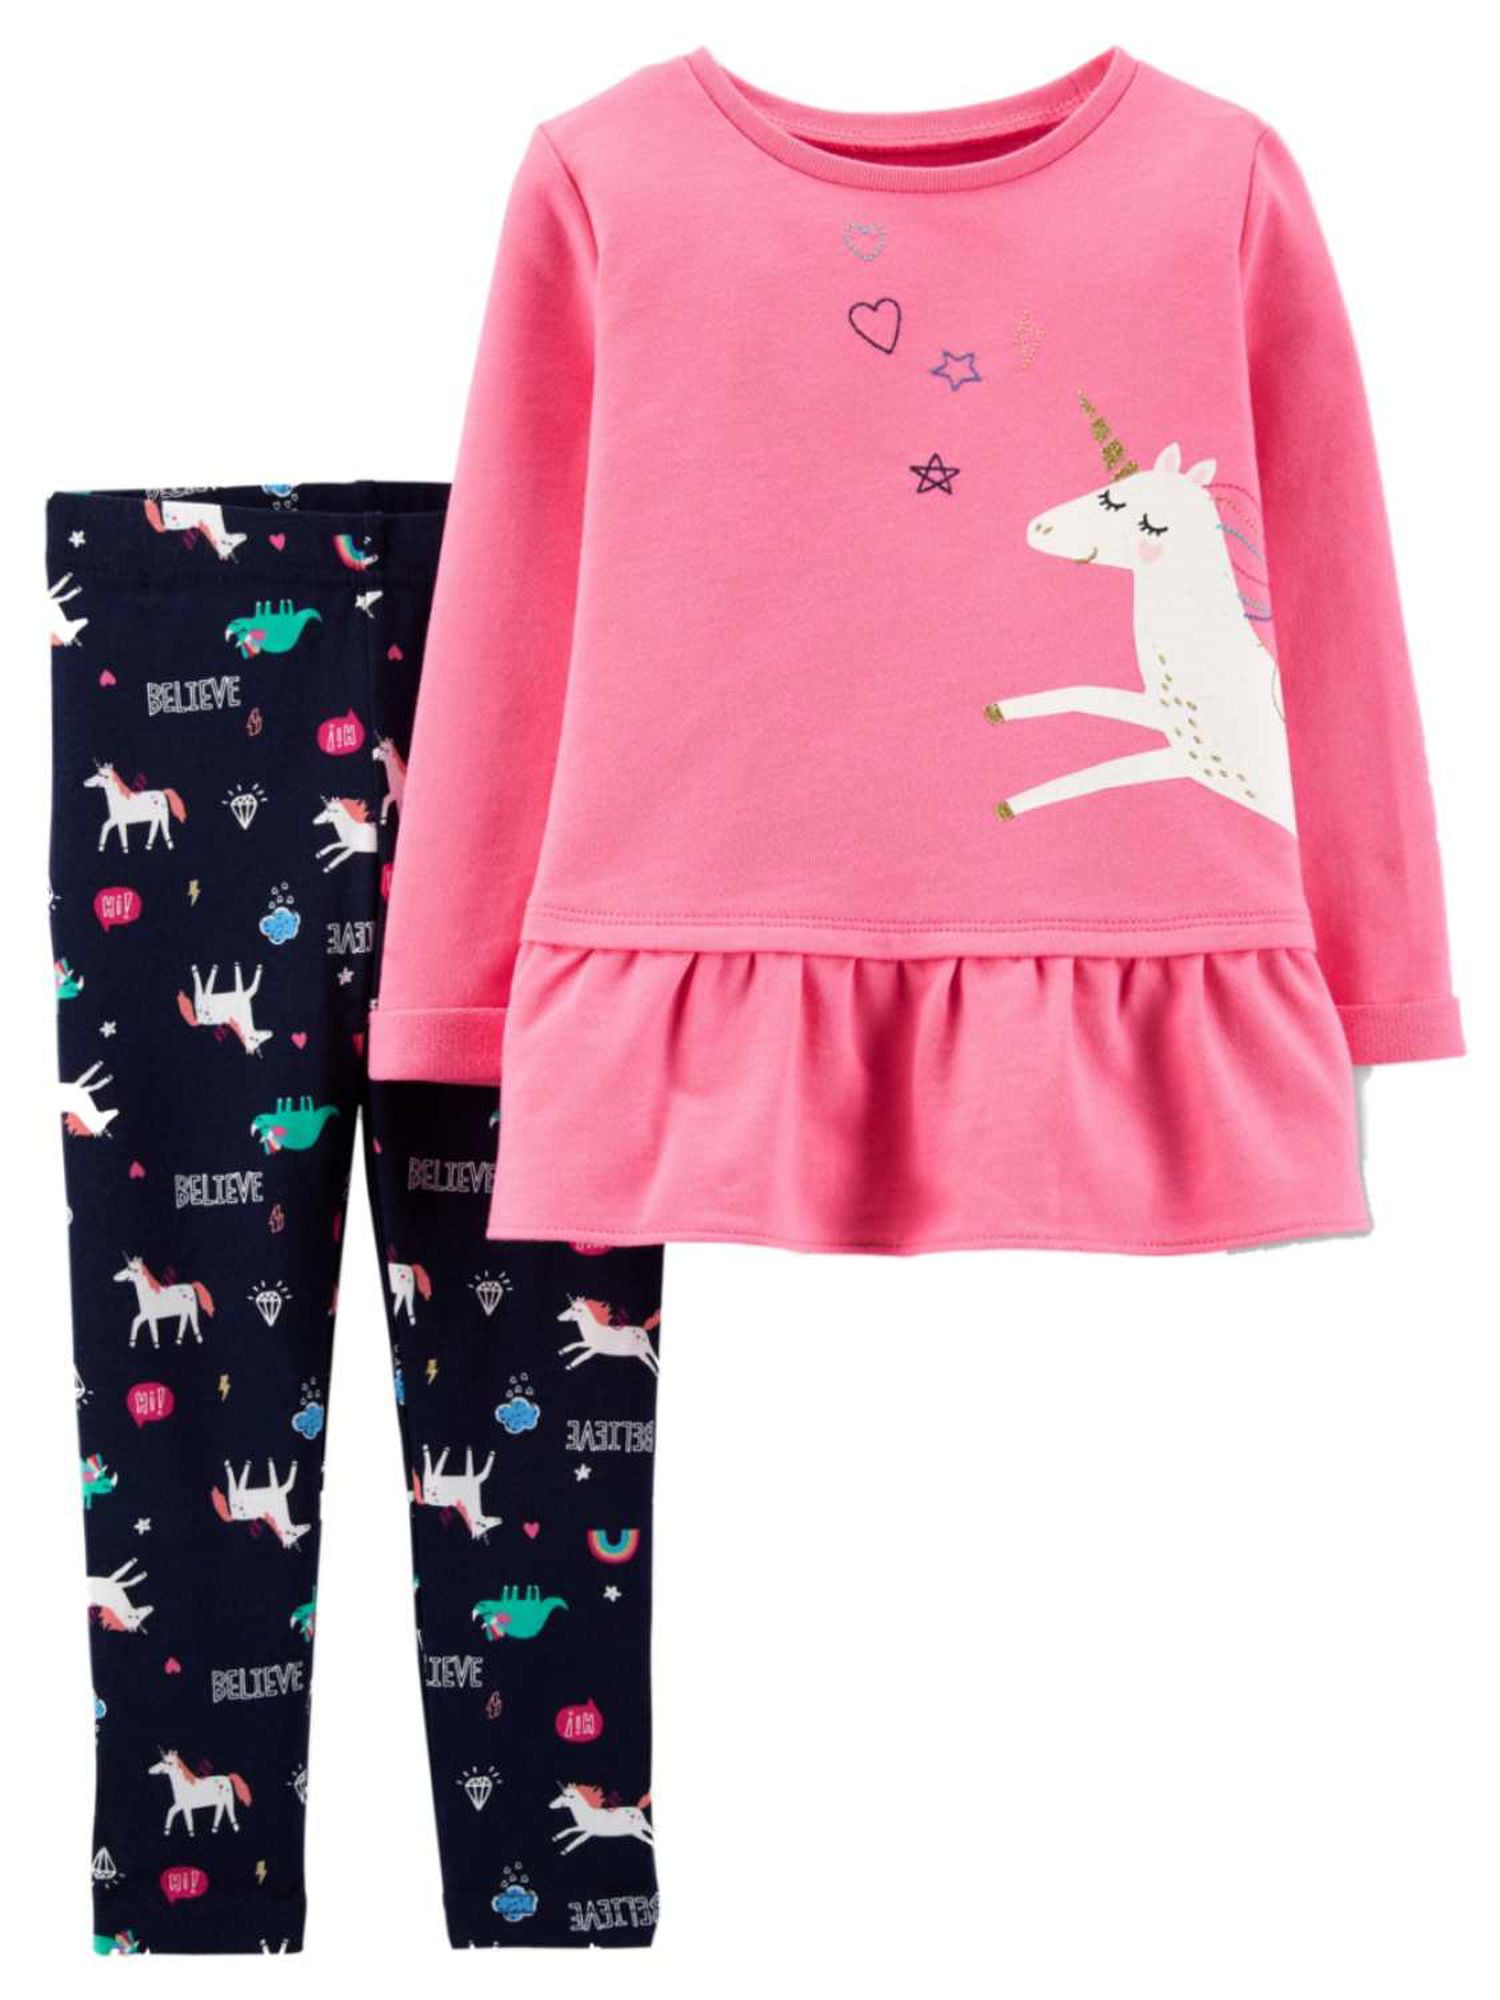 Details about   Carter's Girls Long Sleeve Pink Unicorn Top 2T or 4T 